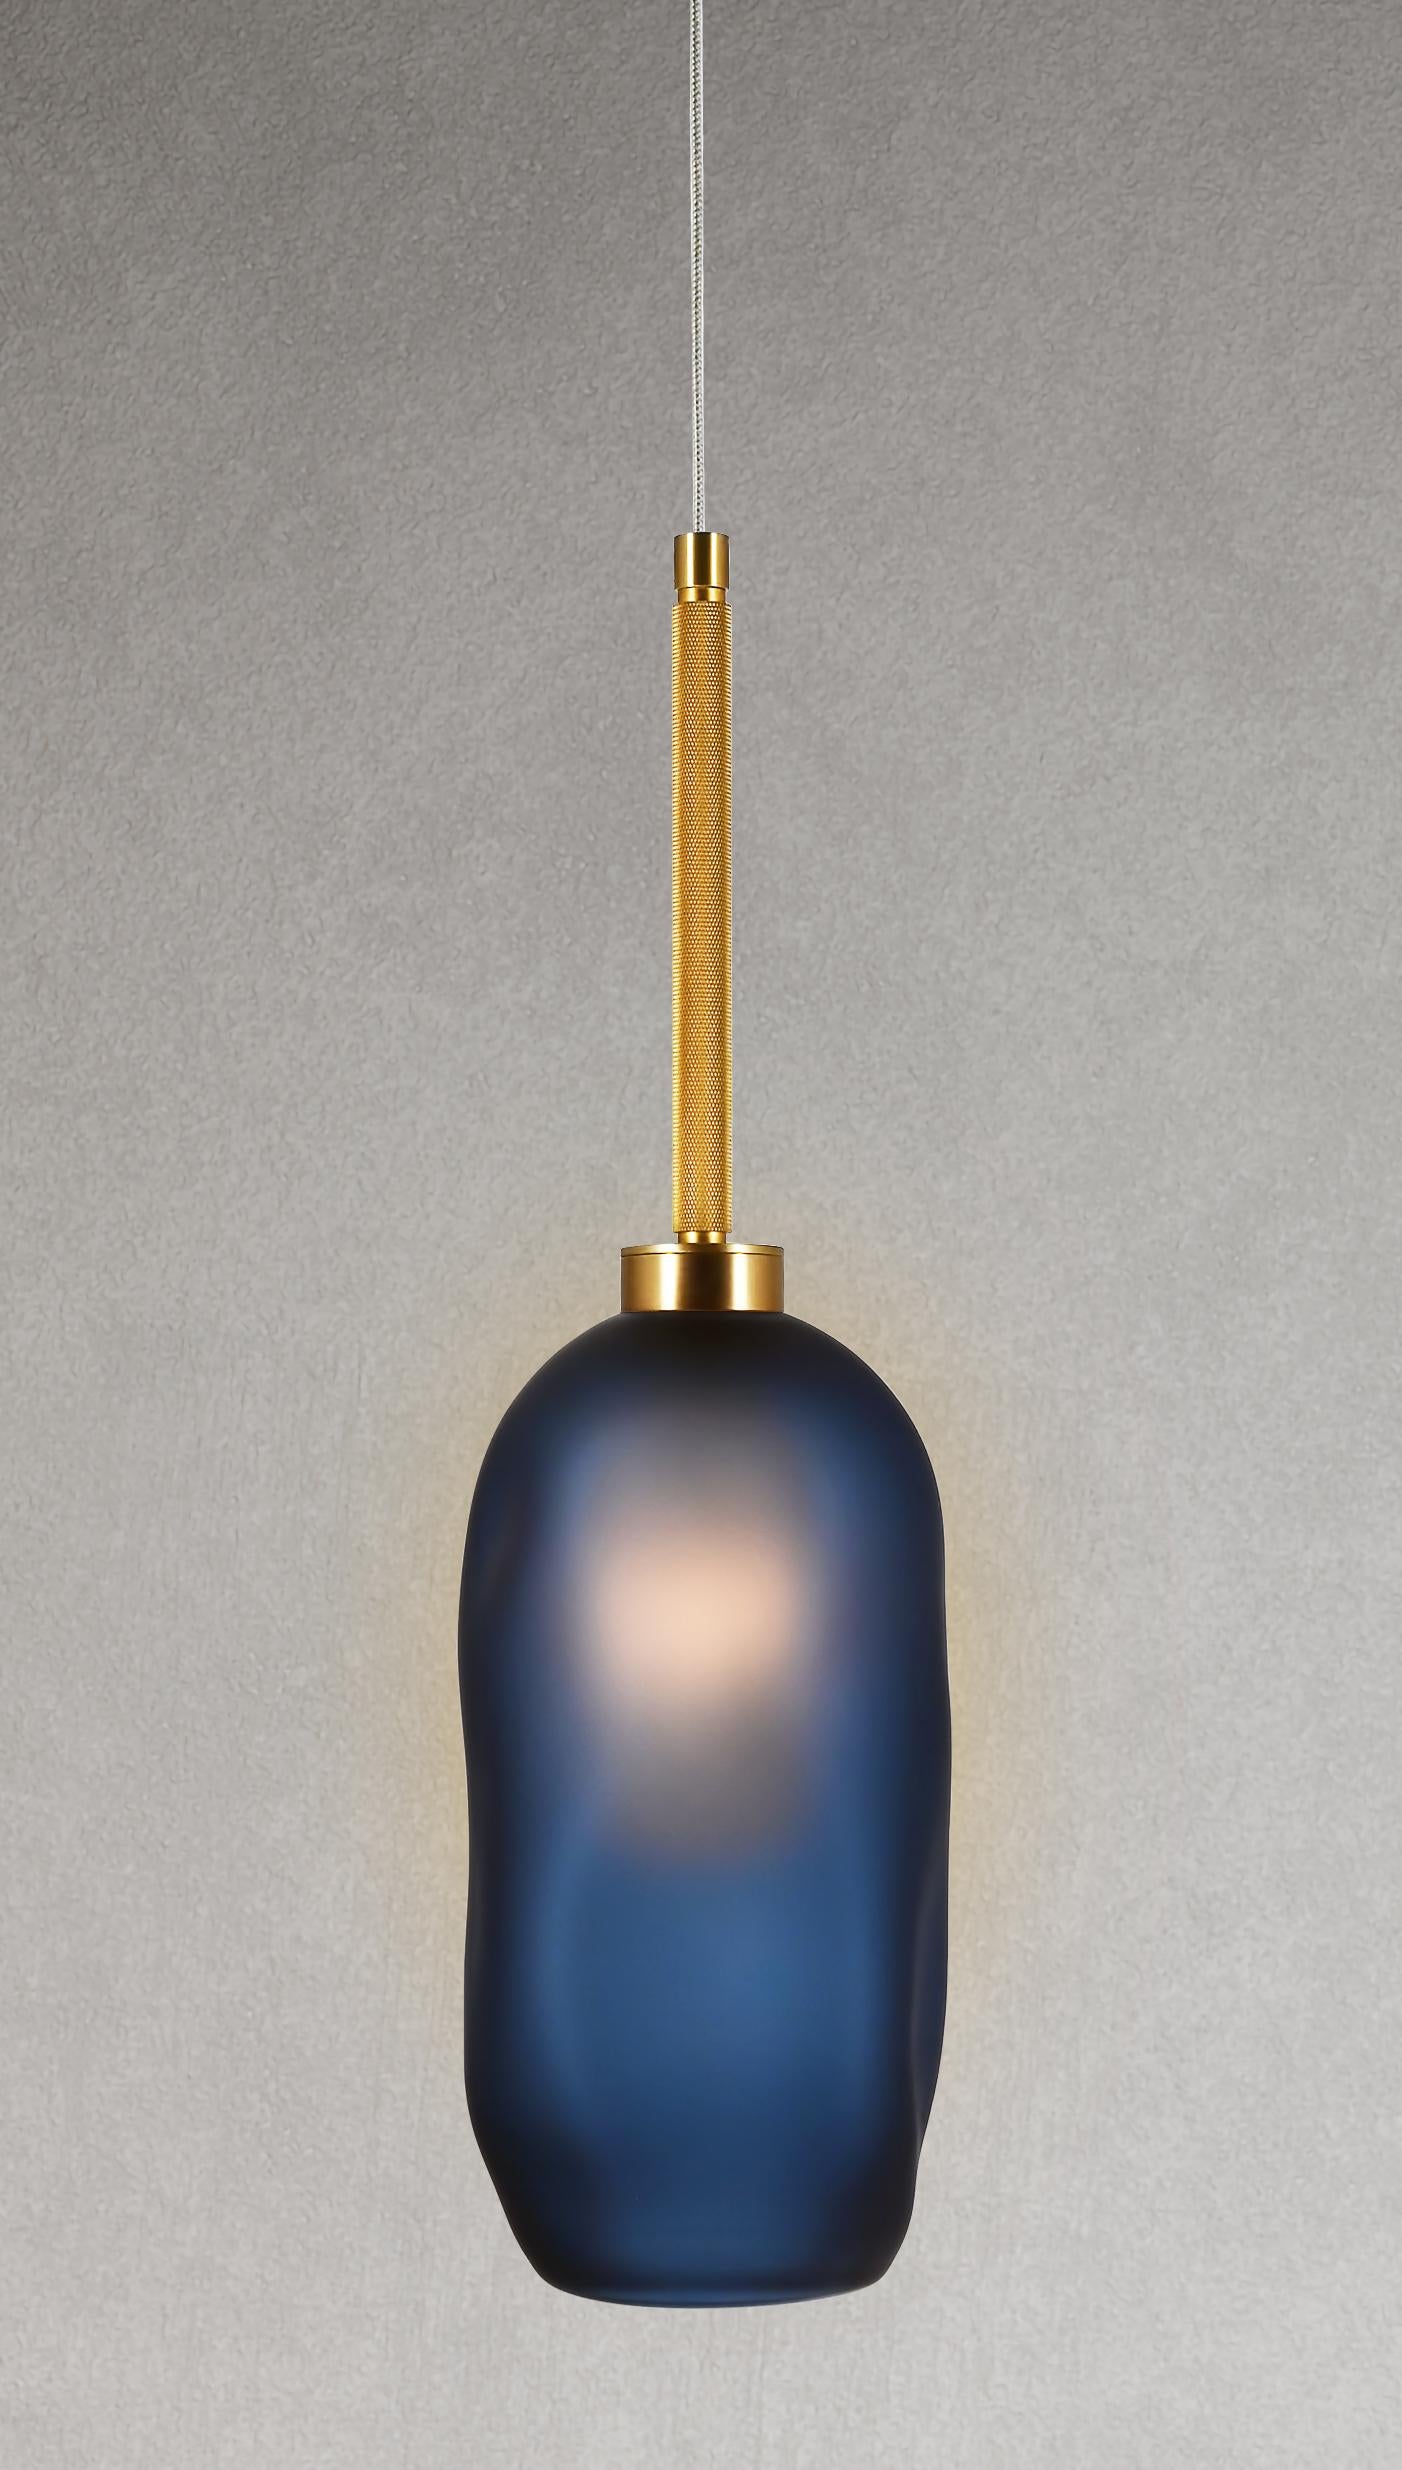 The Catherine can be displayed as a hanging pendant, wall sconce, or grouped in multiples. Our most versatile design also has a new, elevated look: a tubular oval glass diffuser that perfects the art of the soft glow. Balanced by the masculine edge